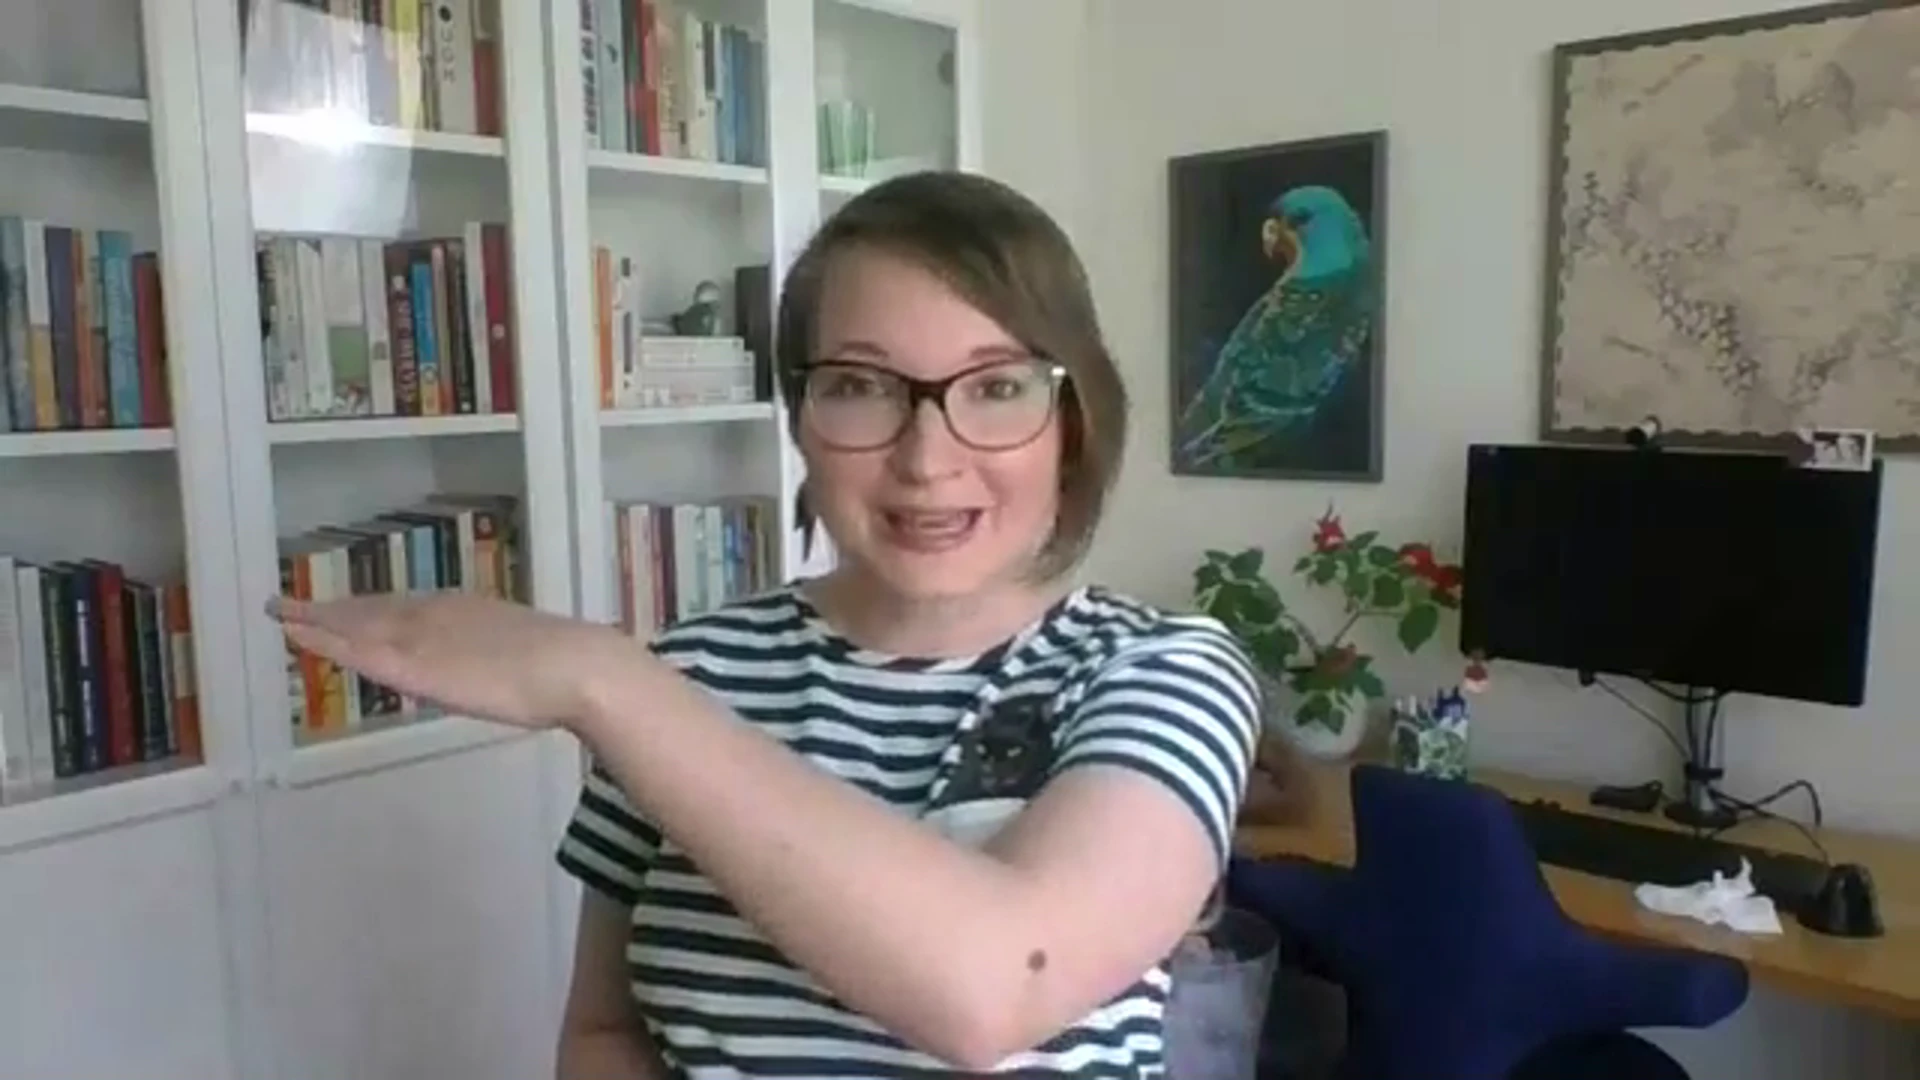 Christina is midway through talking animatedly, and is gesturing an upward slope with her left arm. She is wearing a stripey green and white t-shirt.